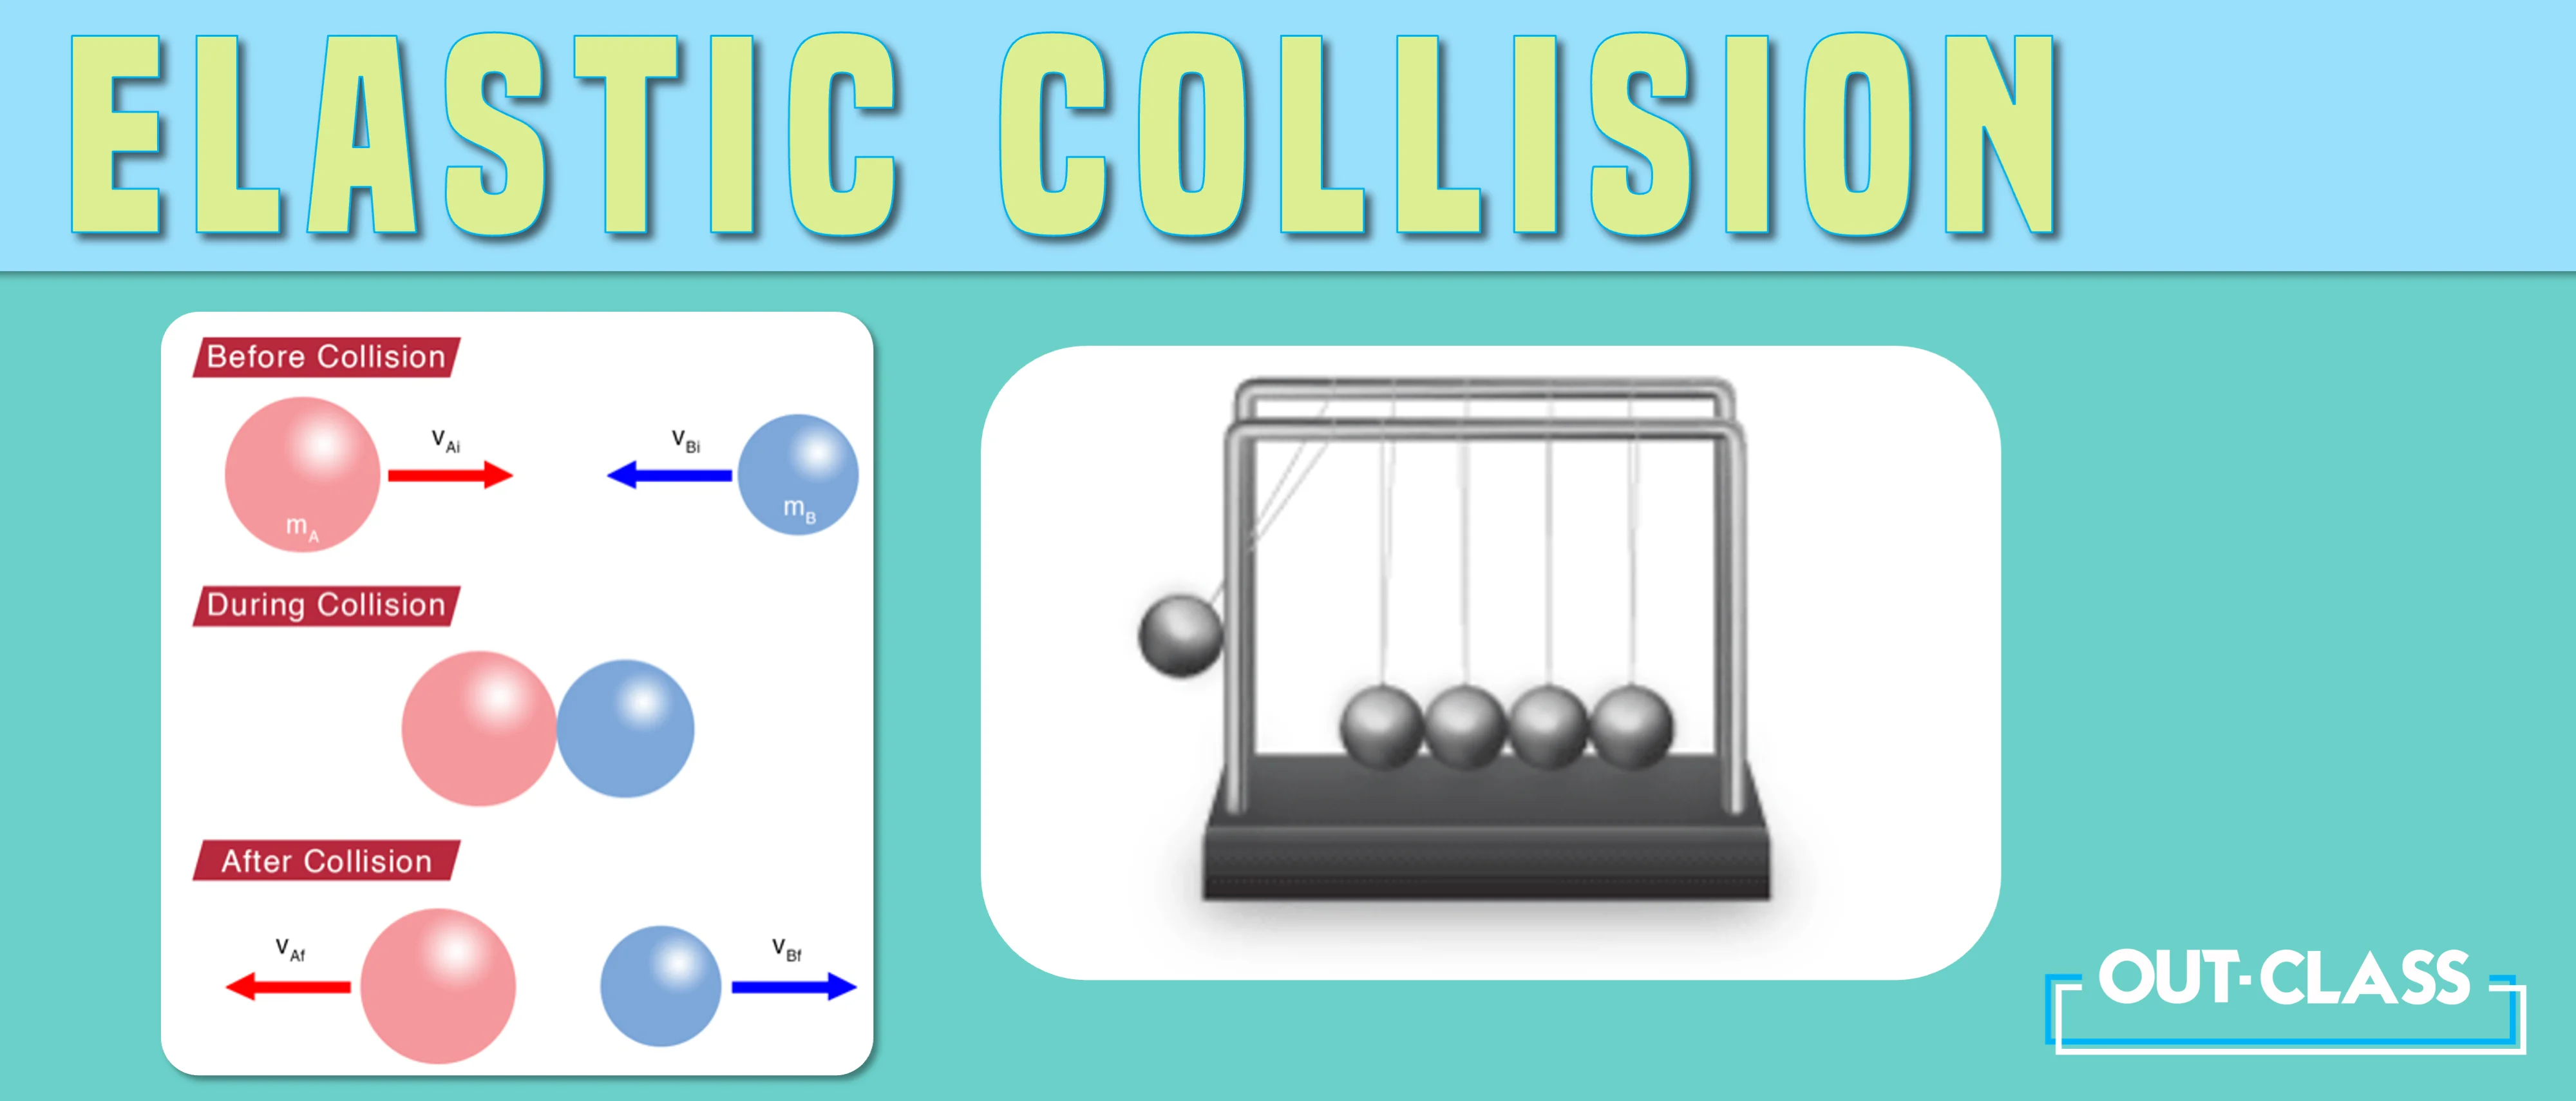 It shows inelastic collision vs elastic collision with elastic collision examples. This occurs when to try to determine if a collision is elastic or inelastic.